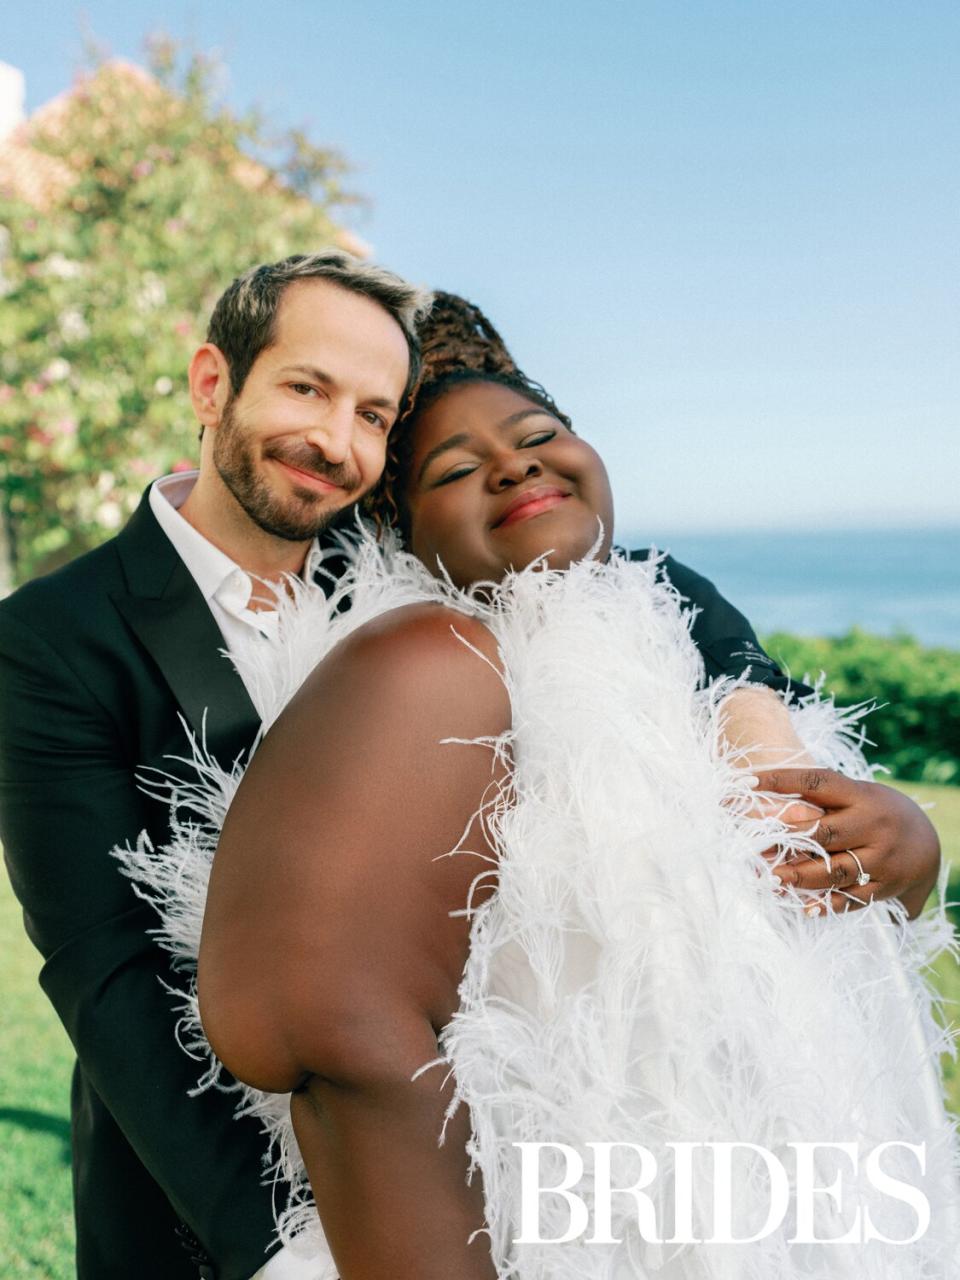 Gabourey Sidibe Covers Brides Style Issue with Fiancé